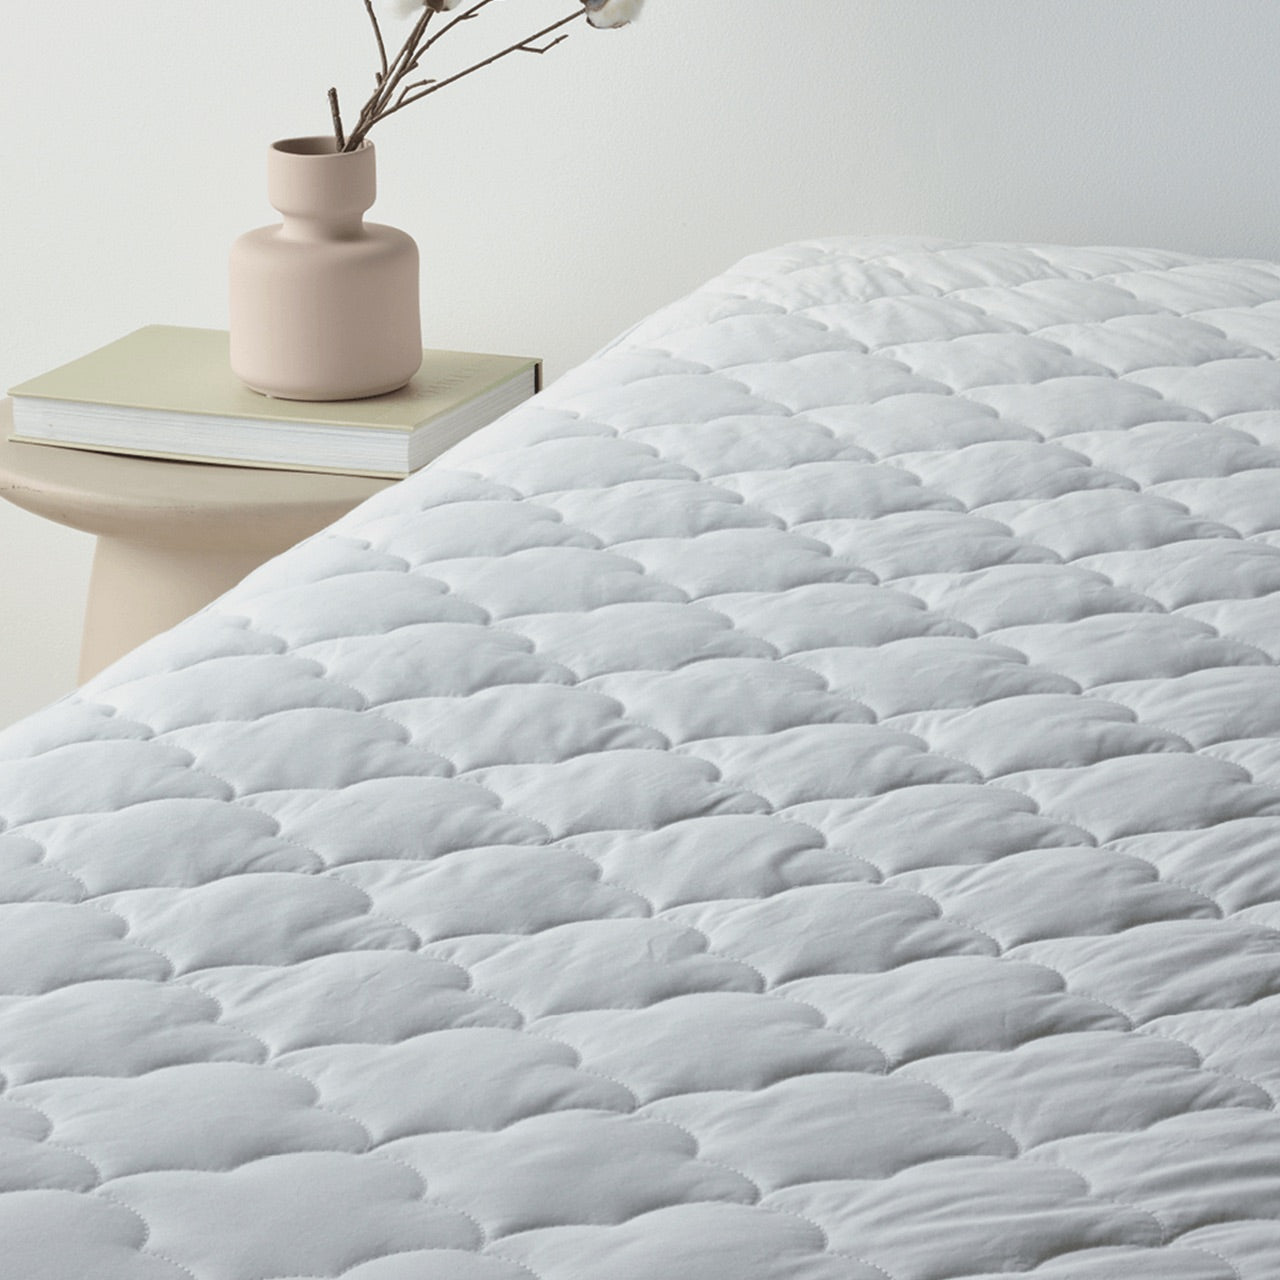 Angled view of Bamboo Wool Mattress Protector on bed